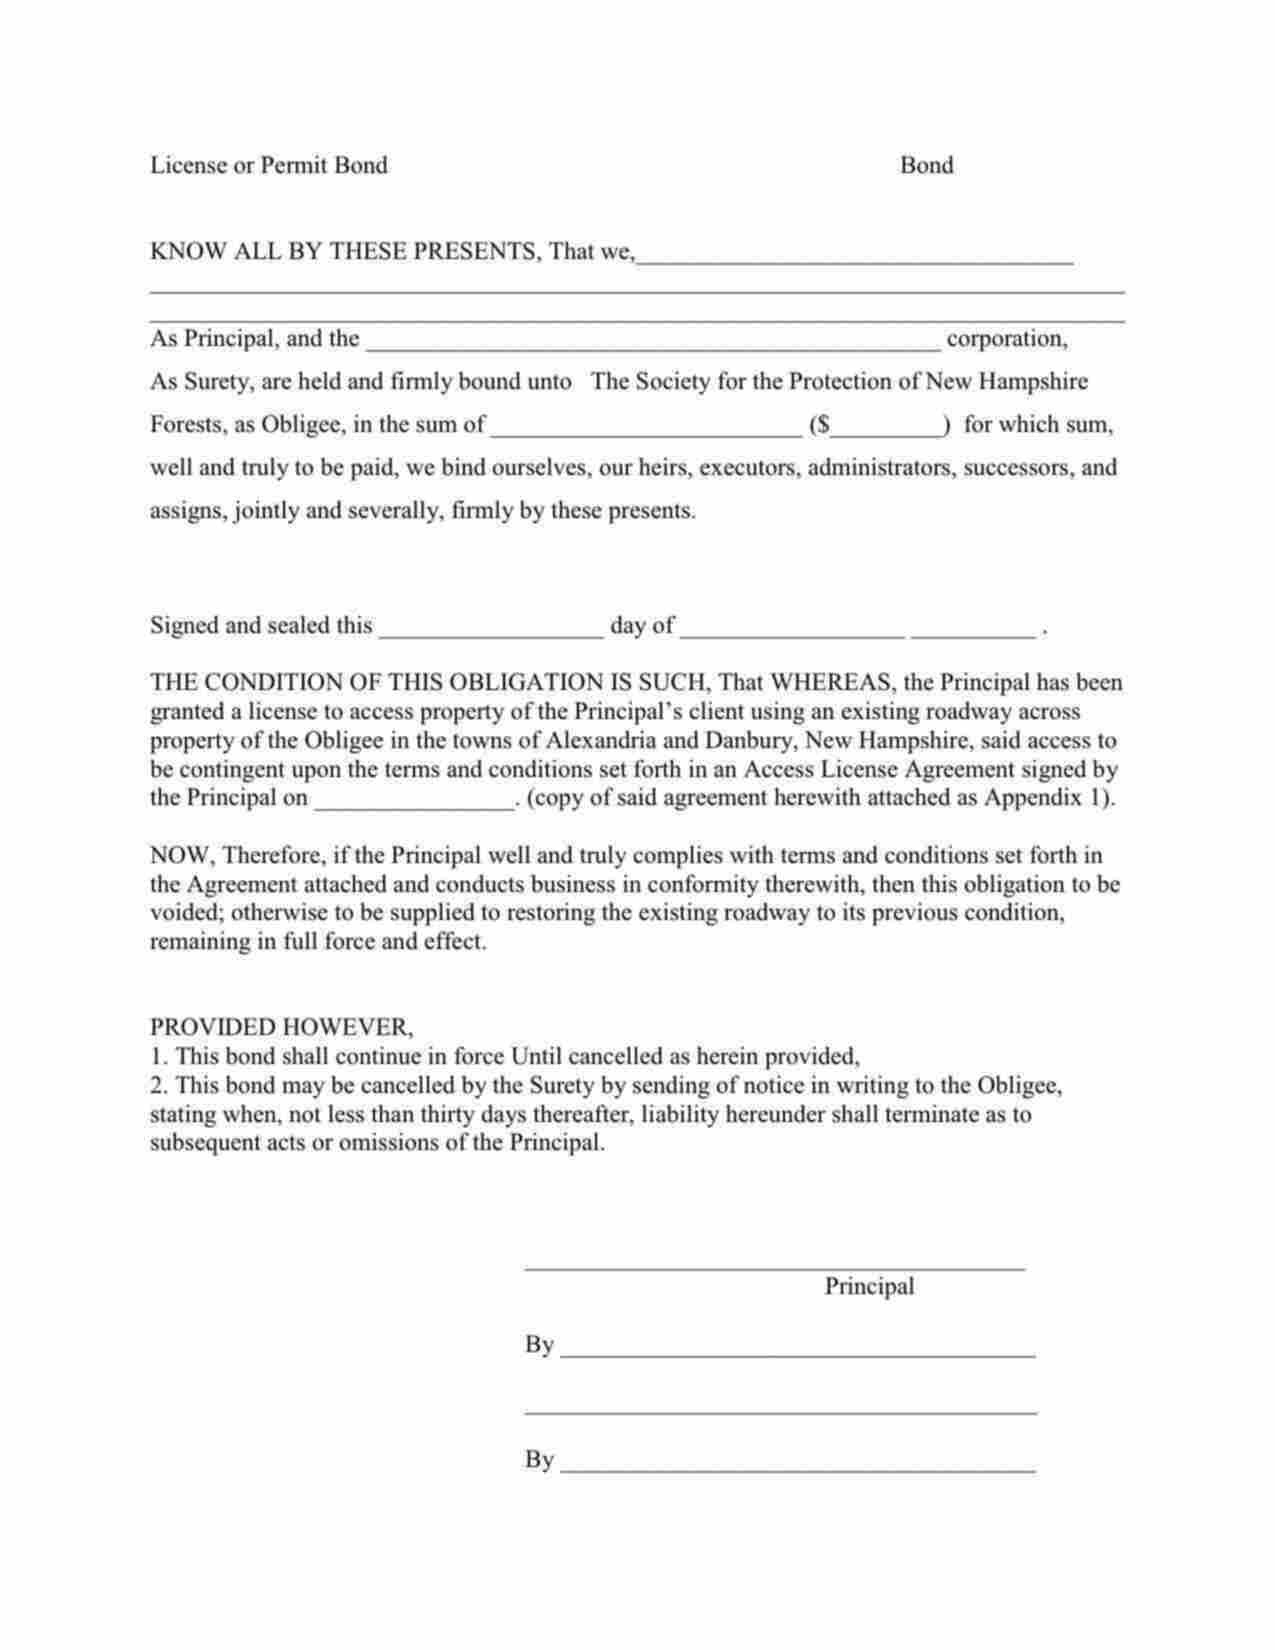 New Hampshire Timber Access License Agreement Bond Form